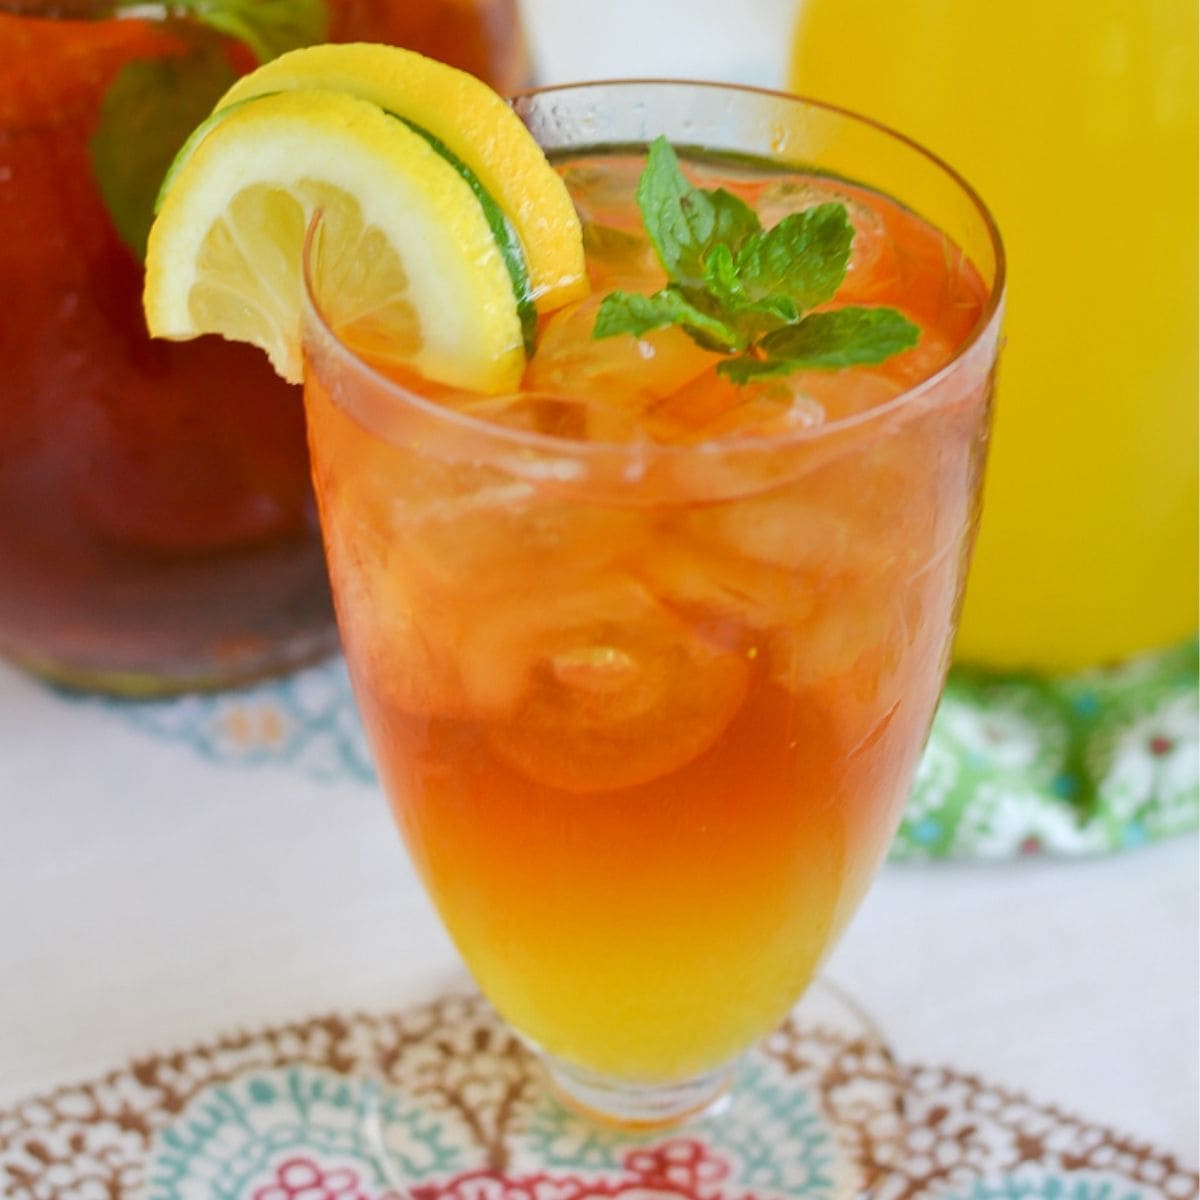 A tall glass filled with Mango Iced Tea with lemon slices and mint leaves garnish.